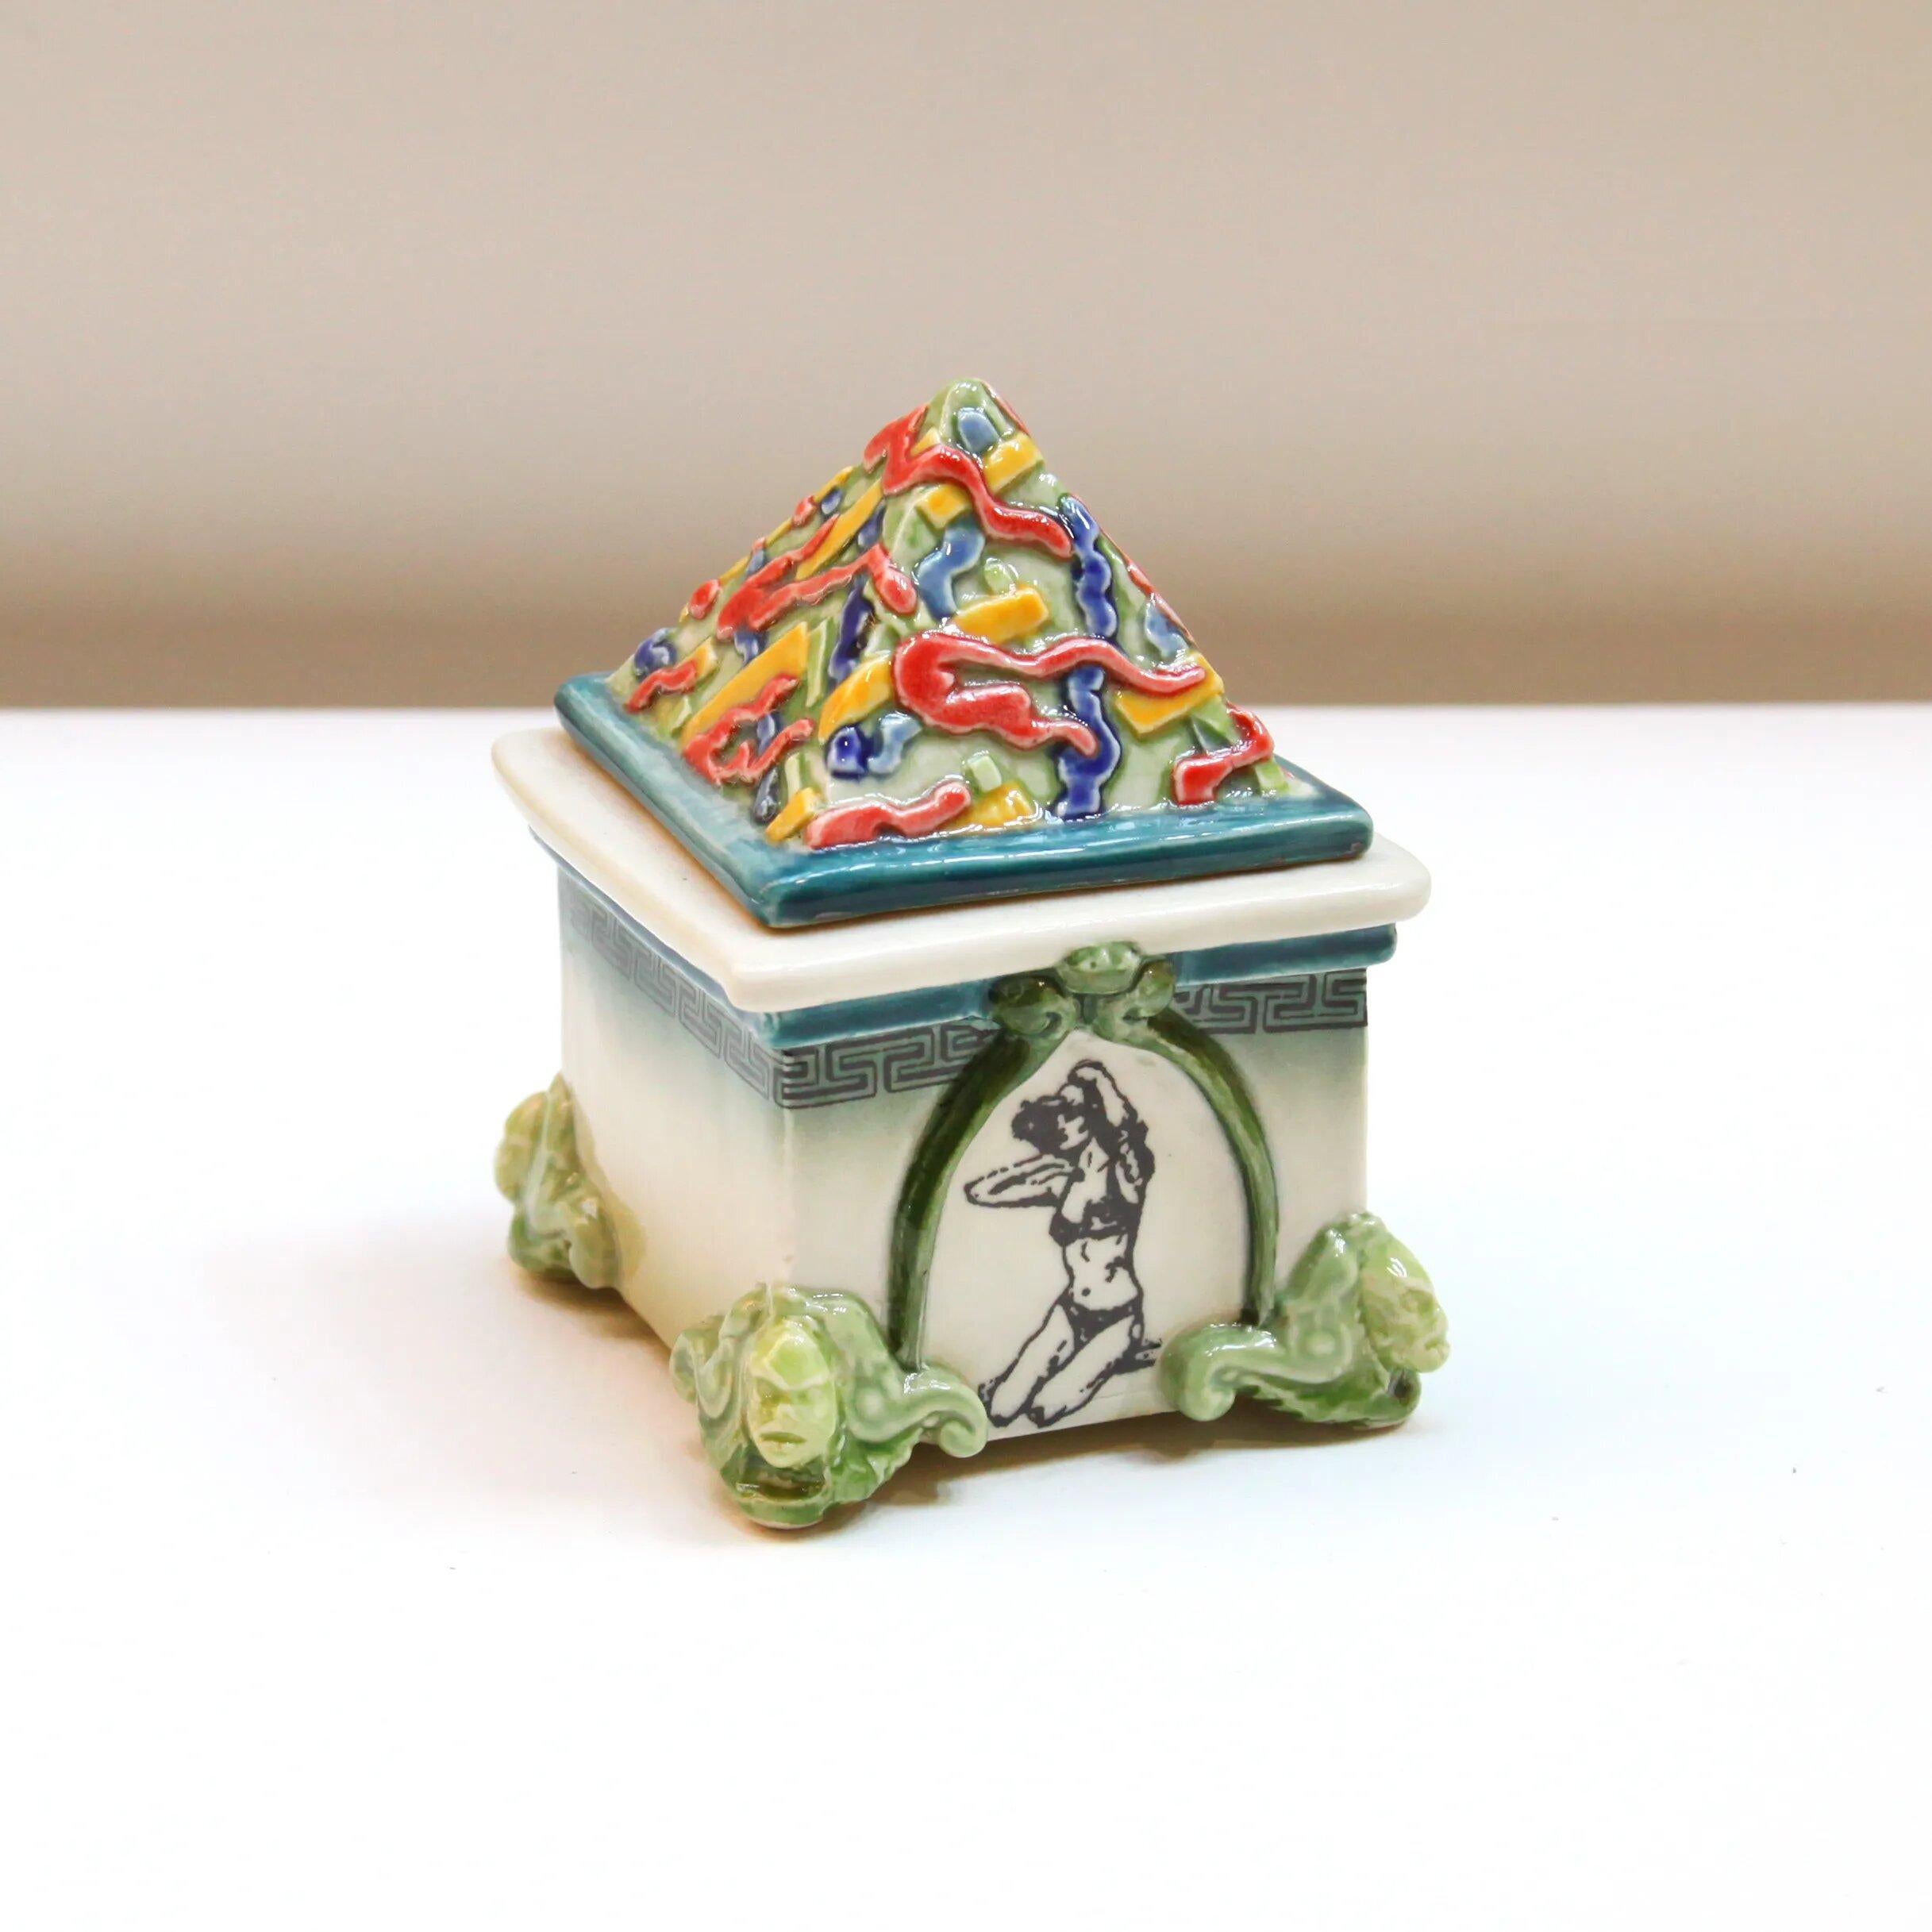 Ceramic Abstract Pyramid Lidded Container - Art by Ron Carlson